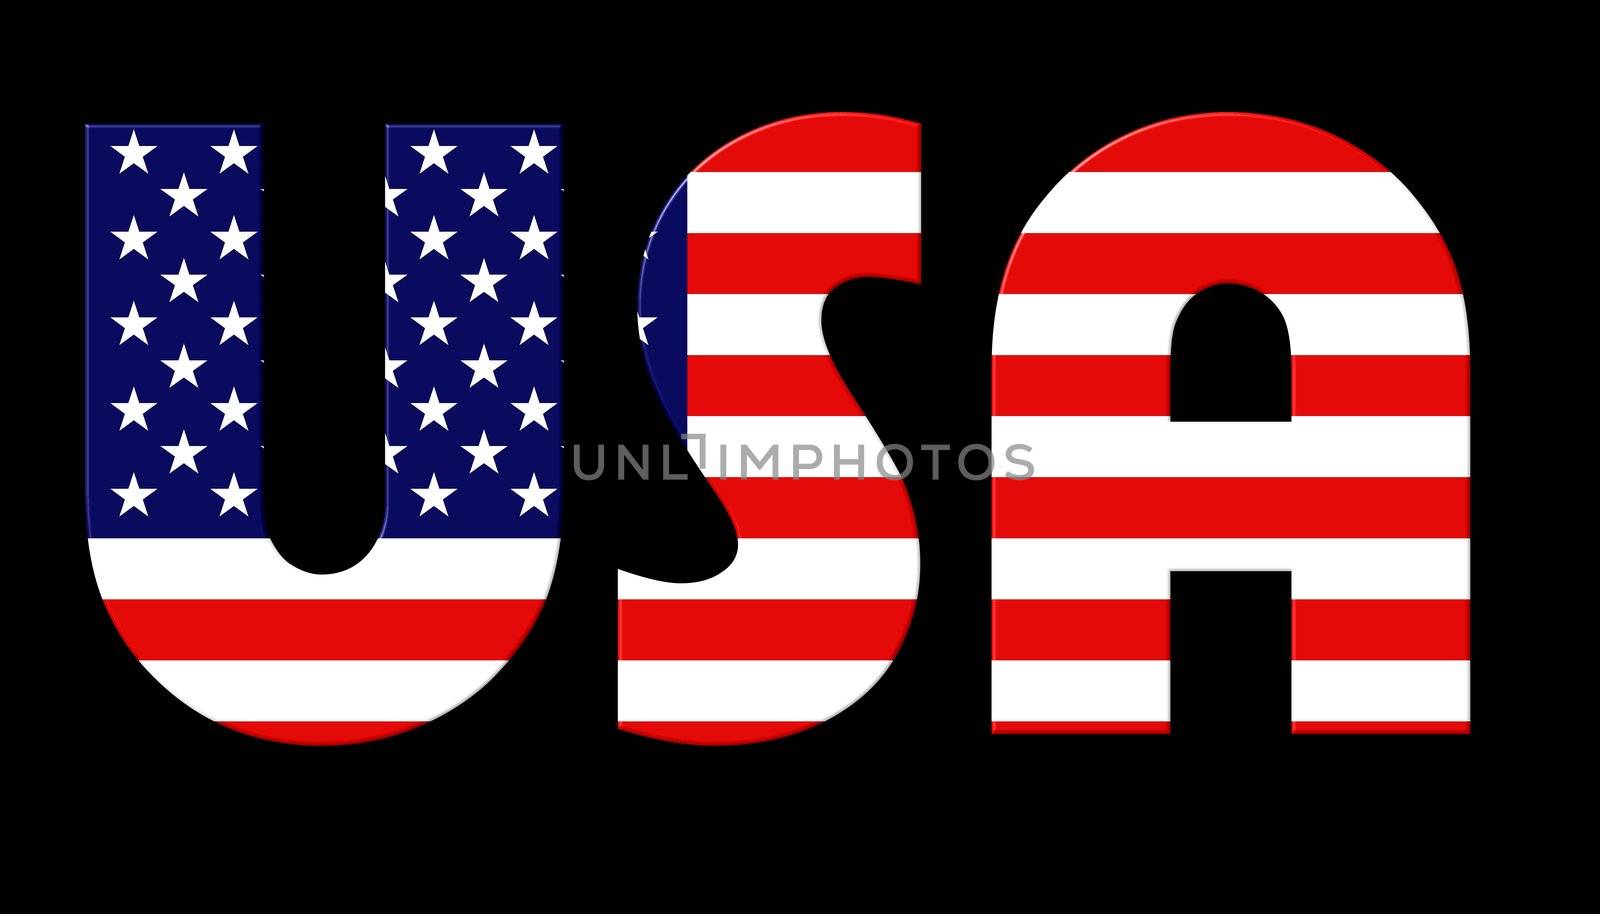 usa on black background by peromarketing